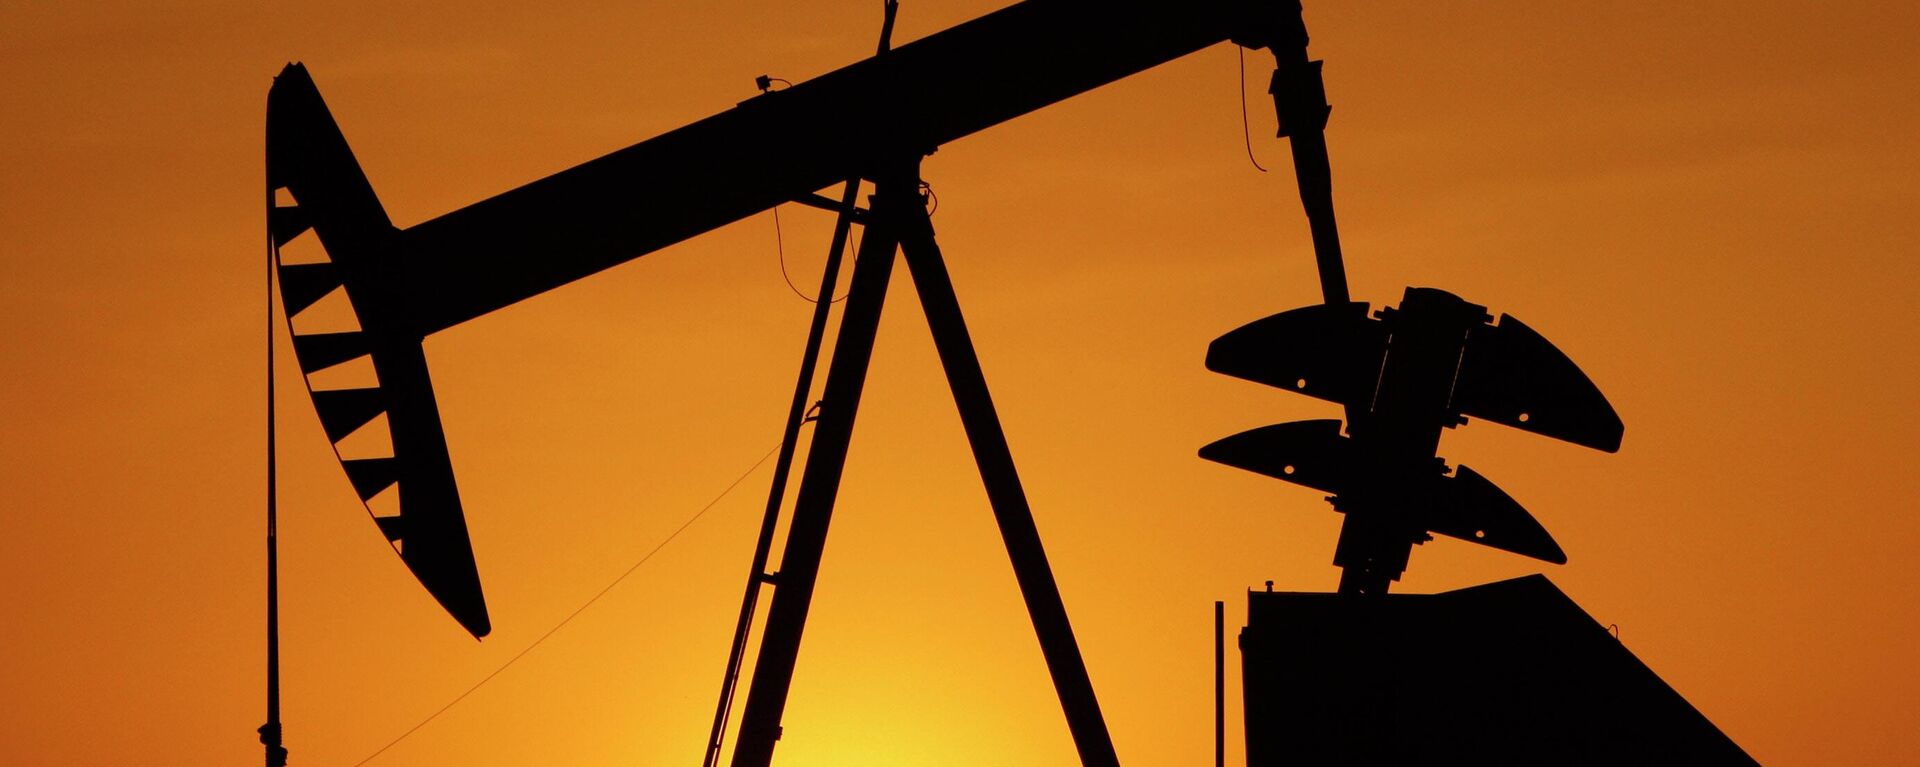 A pump jack is silhouetted against the setting sun in Oklahoma City on March 22, 2012. - Sputnik International, 1920, 12.06.2022